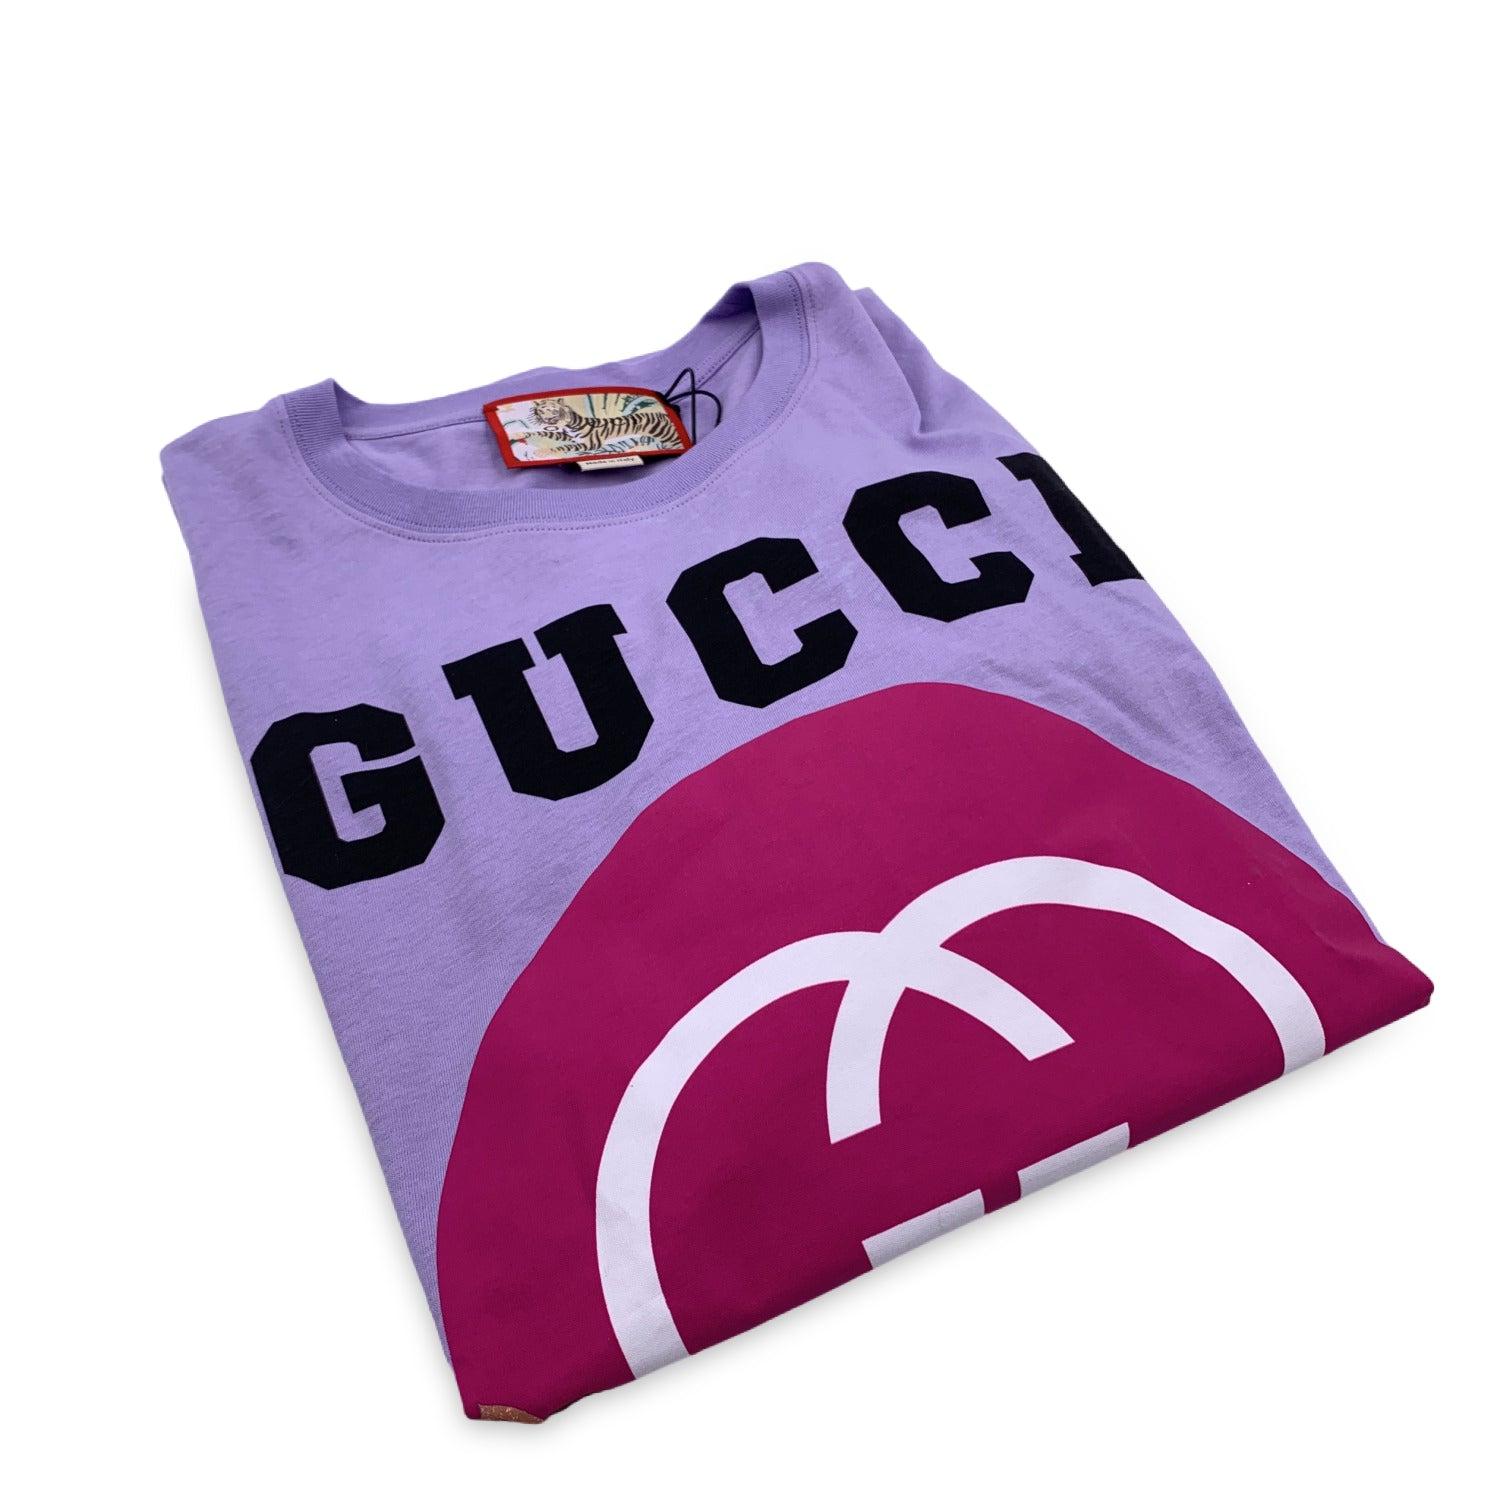 Light Purple 'Gucci Tiger' Unisex T-shirt. Made of 100% cotton. Printed 'Gucci Tiger', logo and tiger on the front. Round neck. Size: M (The size shown for this item is the size indicated by the designer on the label). Retail price is 550 euros.